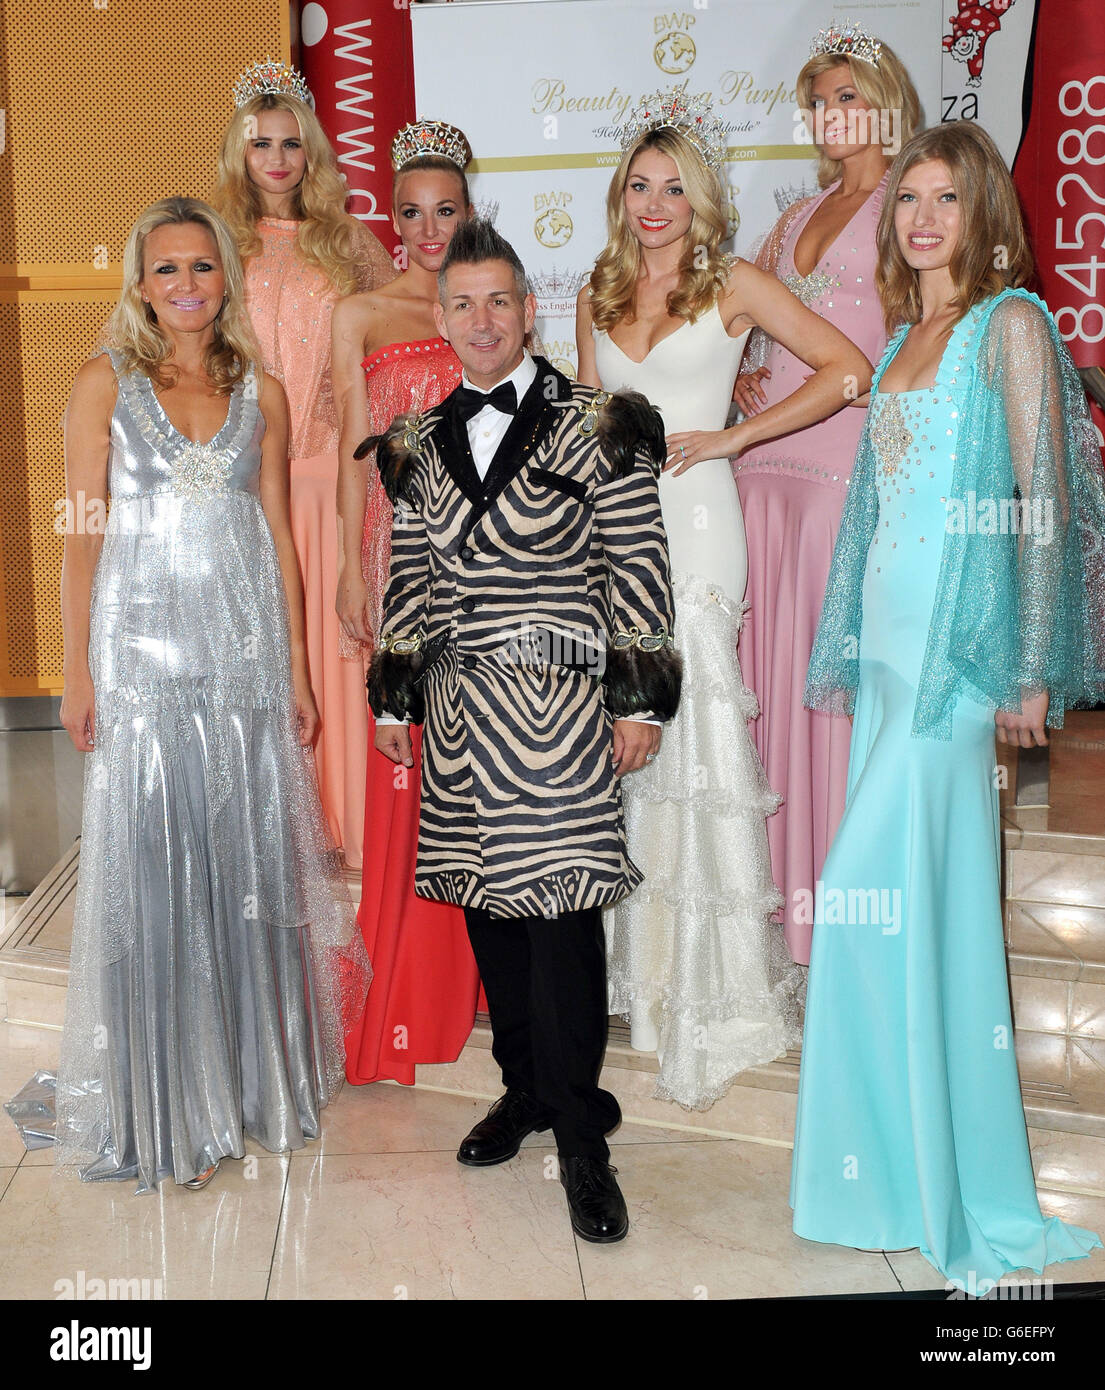 Former Miss England Georgia Horsley, who is set to marry Danny Jones of McFly (third right) poses with Eric Way (centre), before modeling in the Cirque Demelza Fashion show in aid of Demelza Hospice care for Children, Canary Wharf, London. Stock Photo